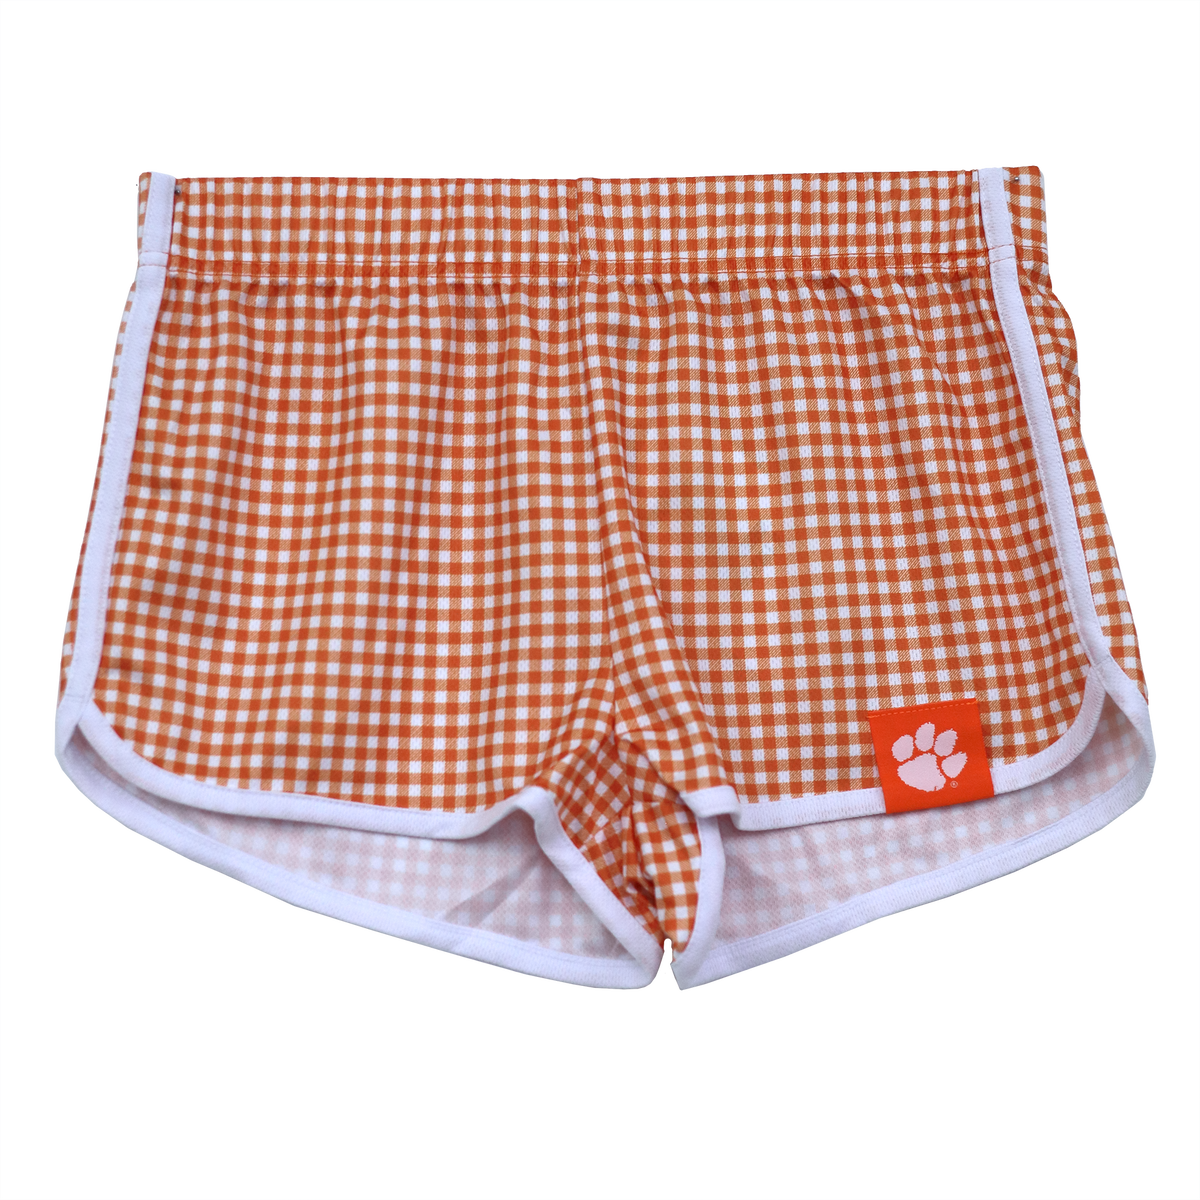 Clemson Orange Gingham Shorts with White Paw Woven Tag